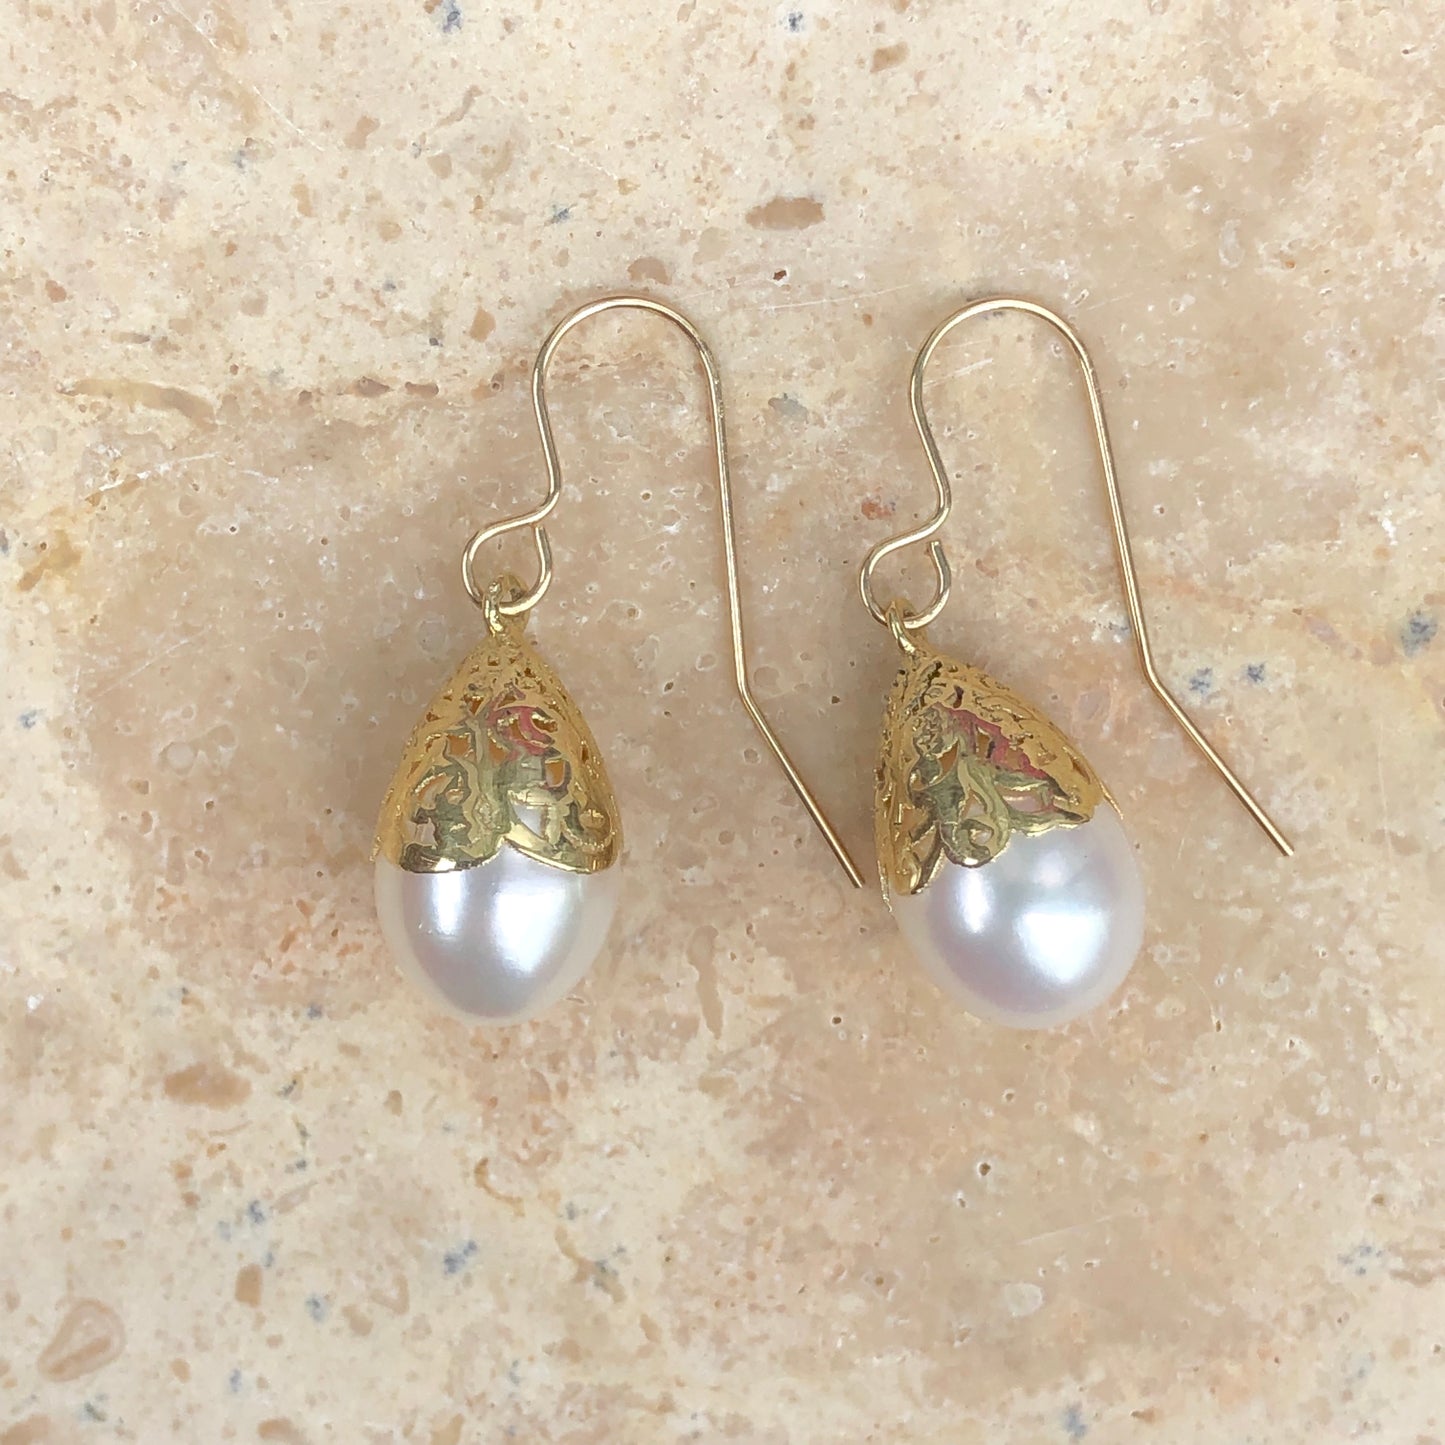 14KT Yellow Gold Filigree Lace + Freshwater Pearl Earrings, 14KT Yellow Gold Filigree Lace + Freshwater Pearl Earrings - Legacy Saint Jewelry